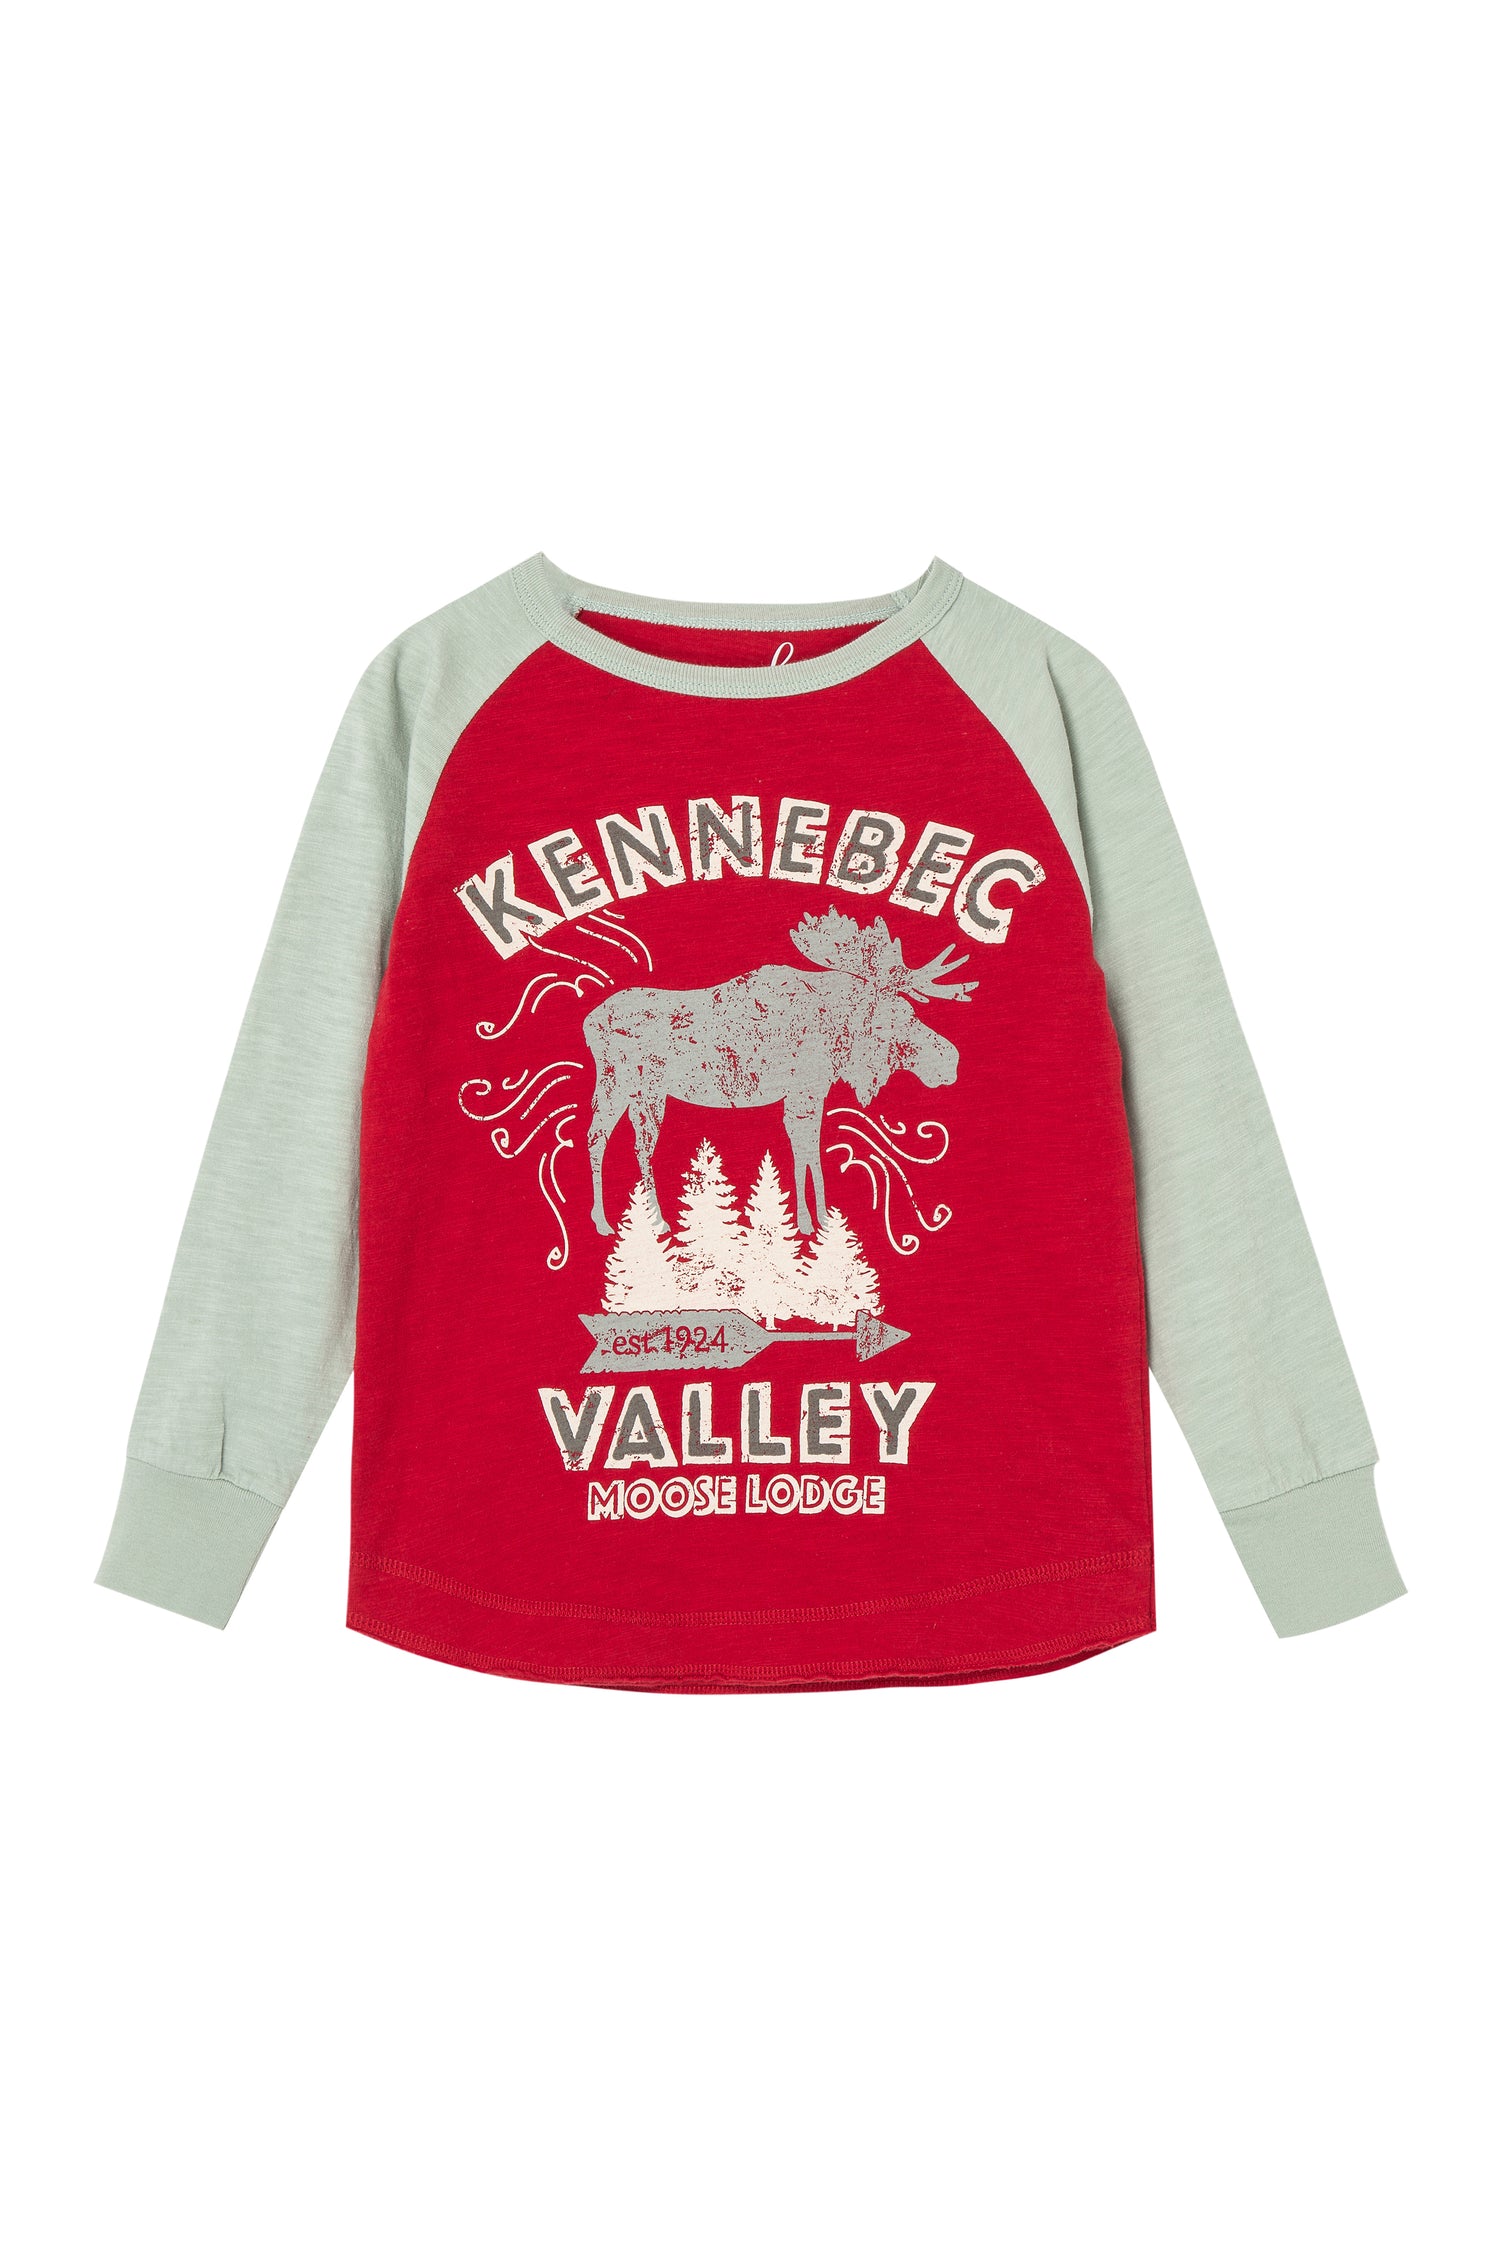 Front view of red long sleeve with a moose and "Kennebec" written